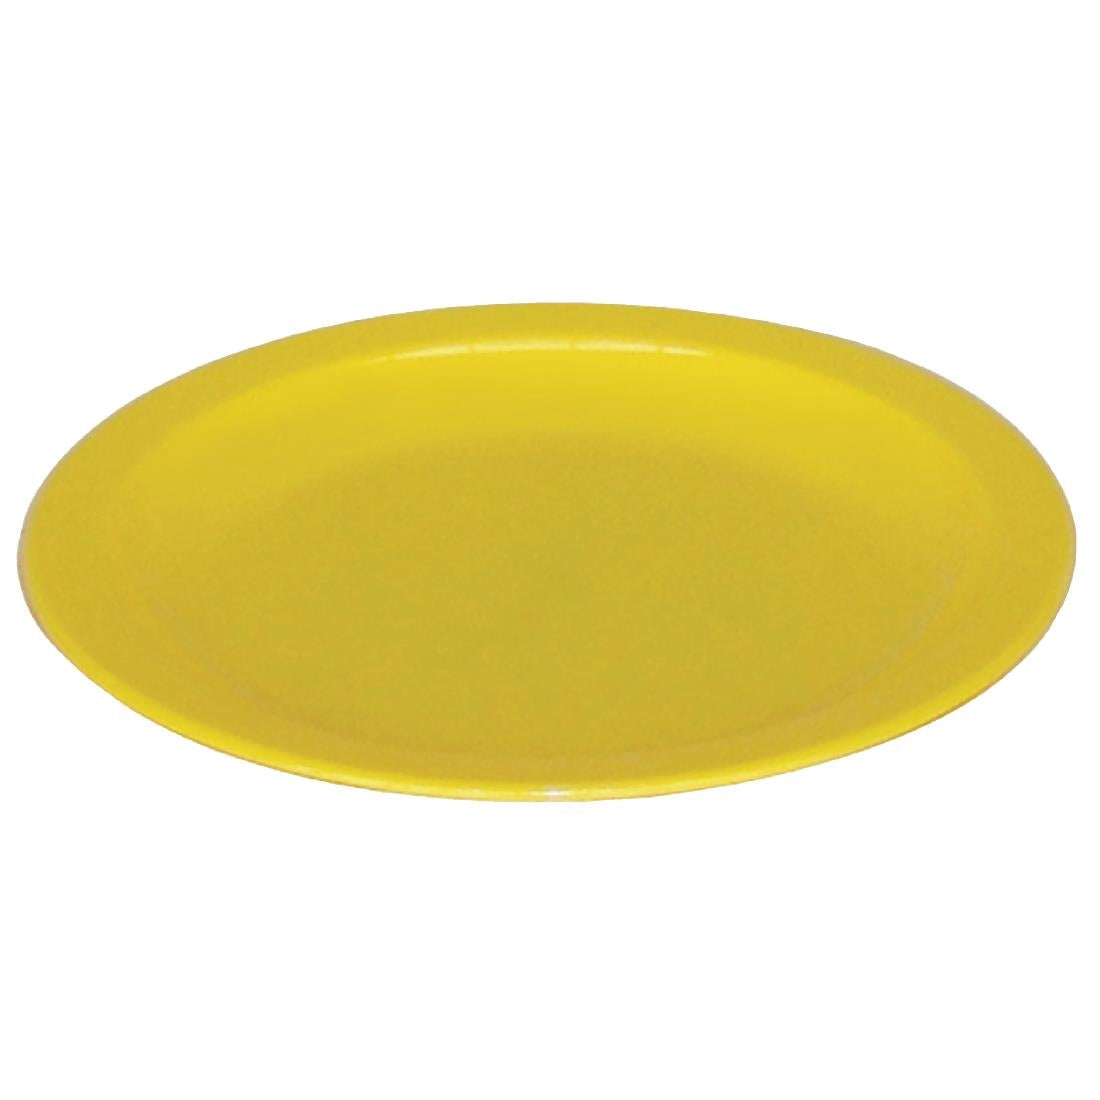 CB767 Olympia Kristallon Polycarbonate Plates Yellow 230mm (Pack of 12)